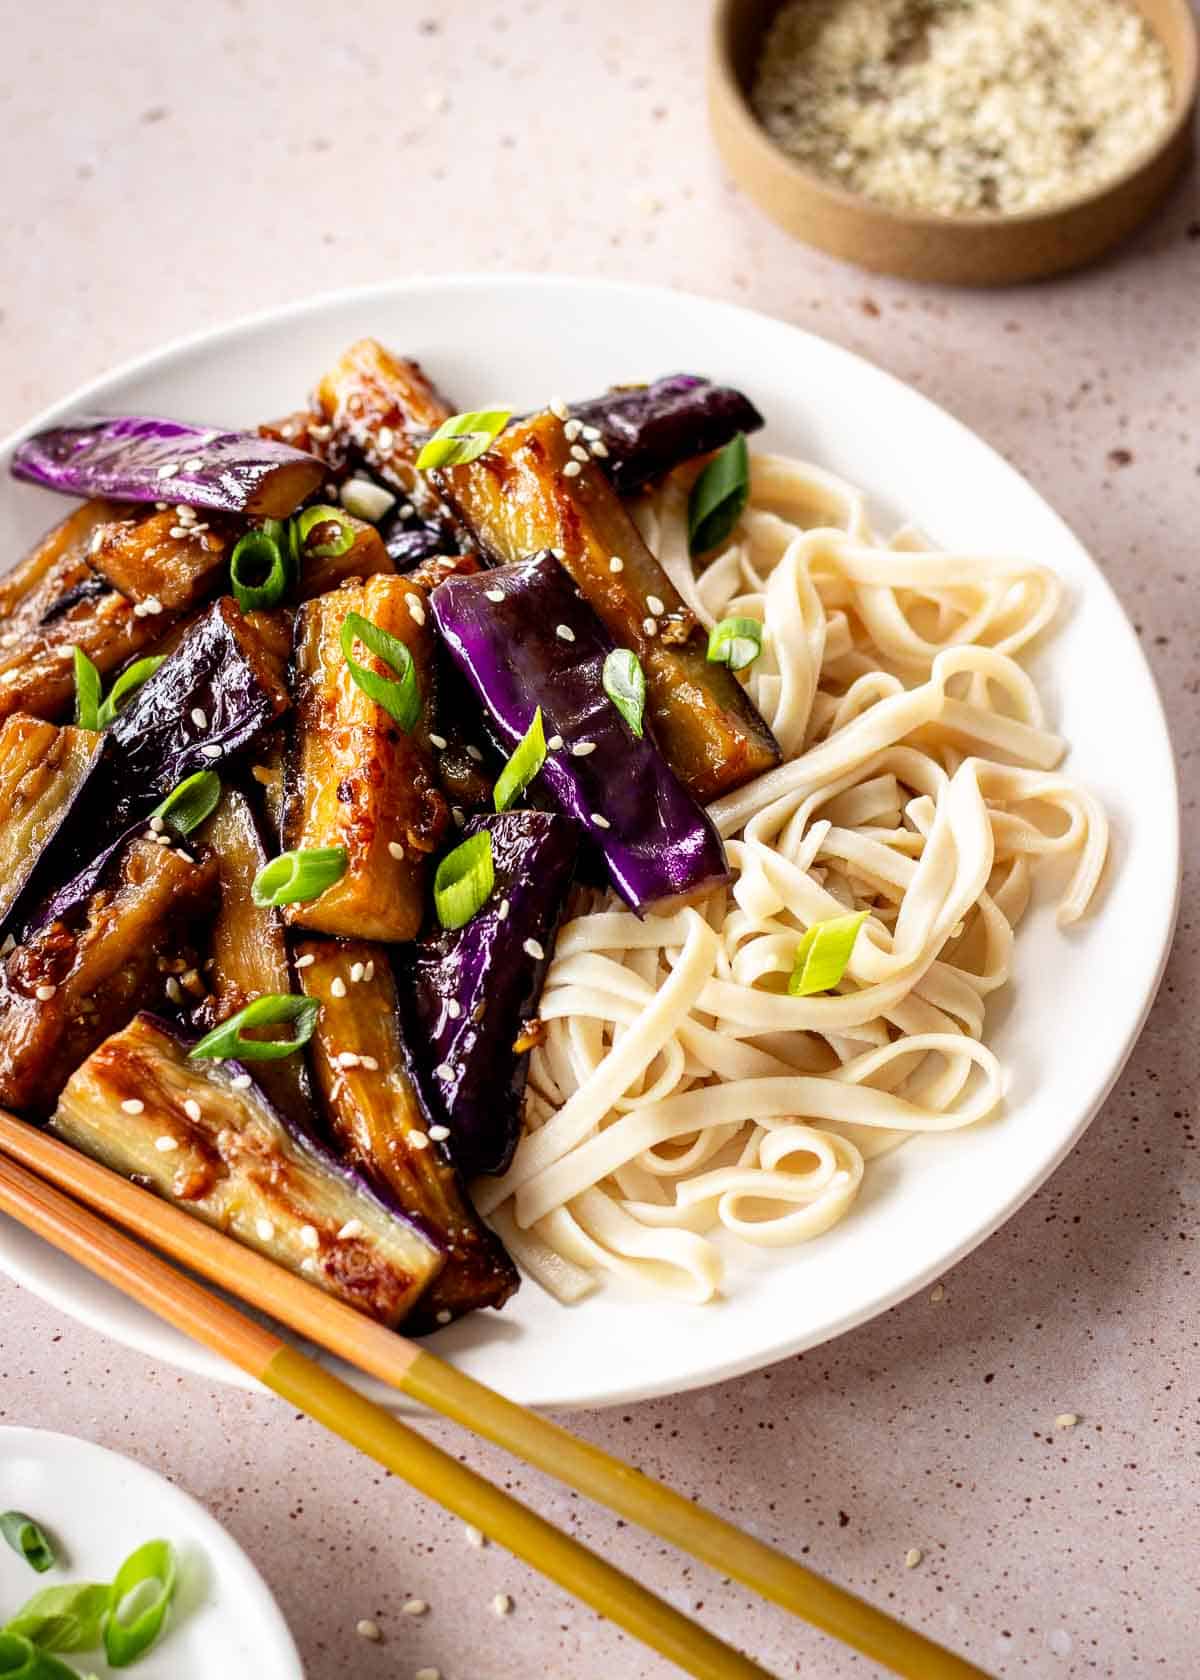 A white plate of eggplant stir fry and flat noodles, decorated with green onions and sesame seeds. A pair of chopsticks sits on the side of the plate.